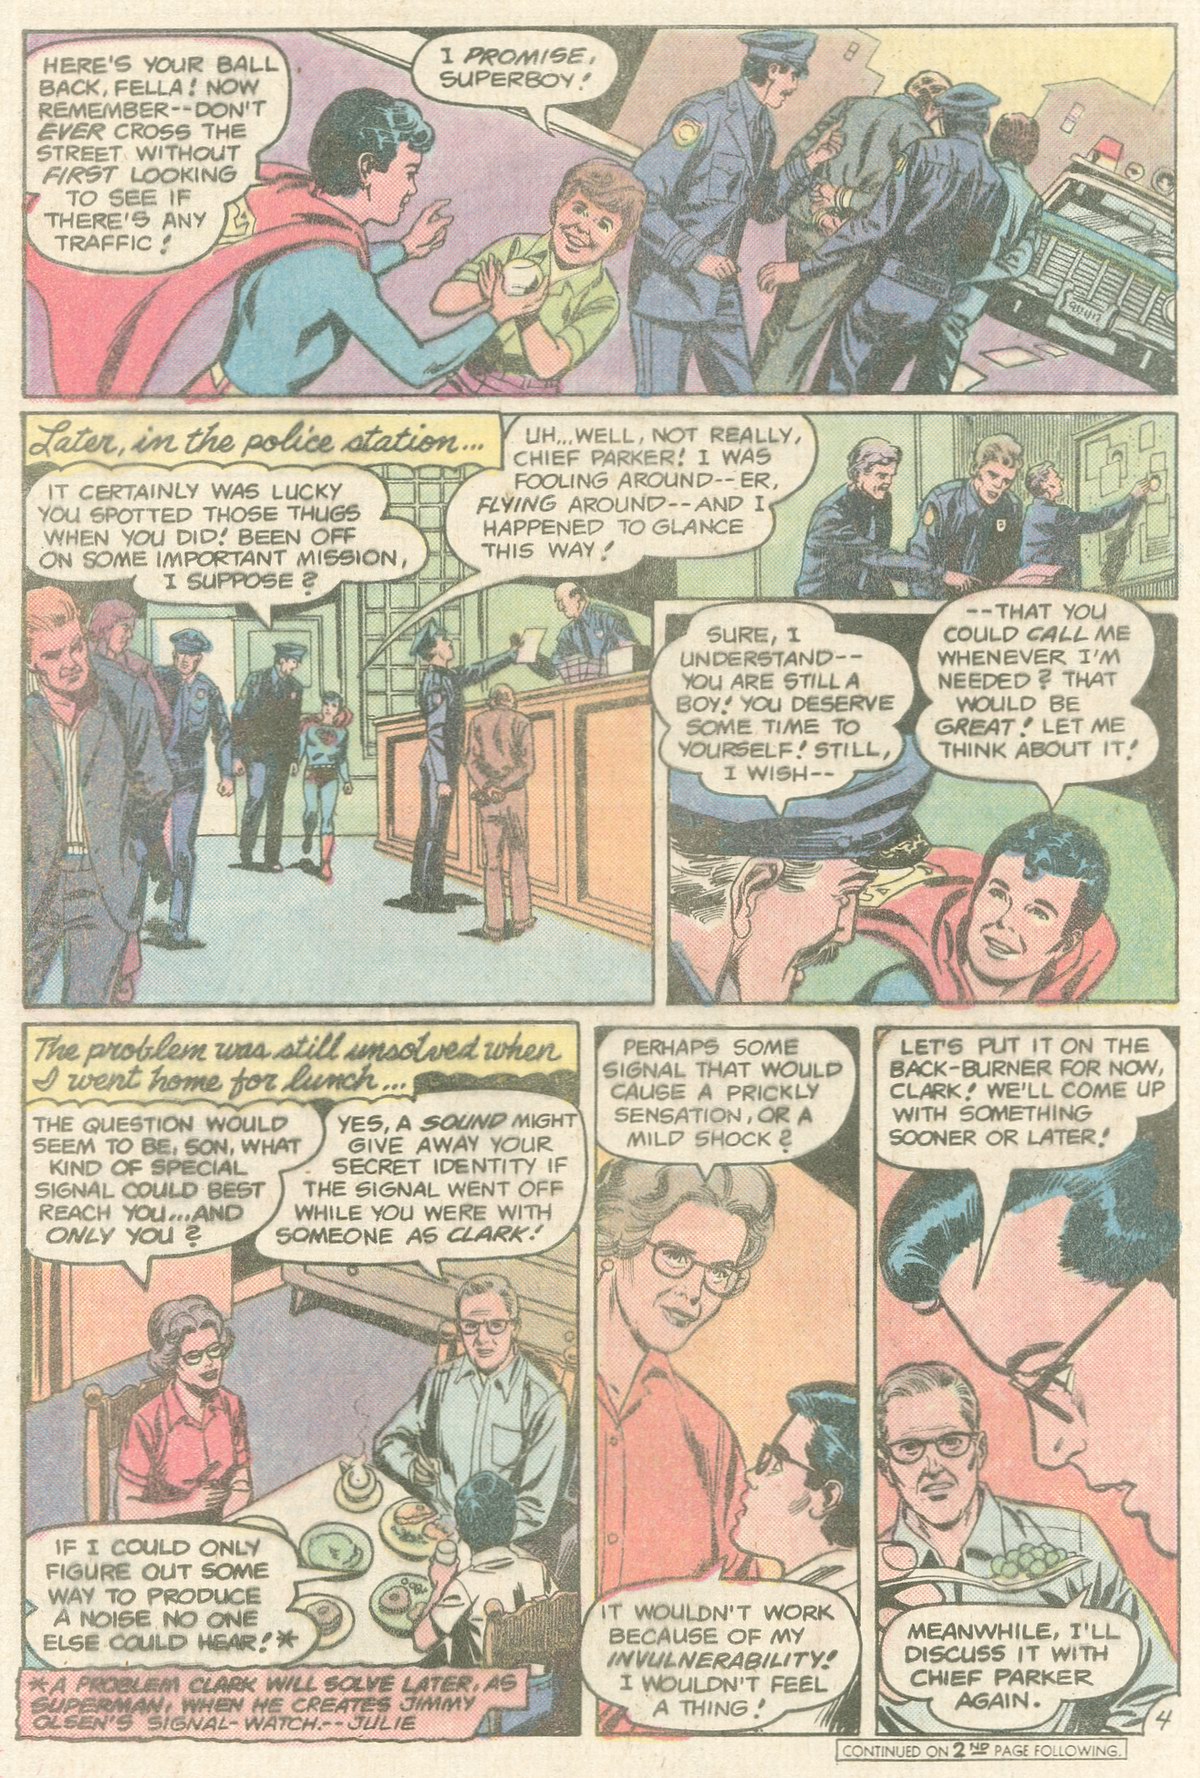 The New Adventures of Superboy 23 Page 23